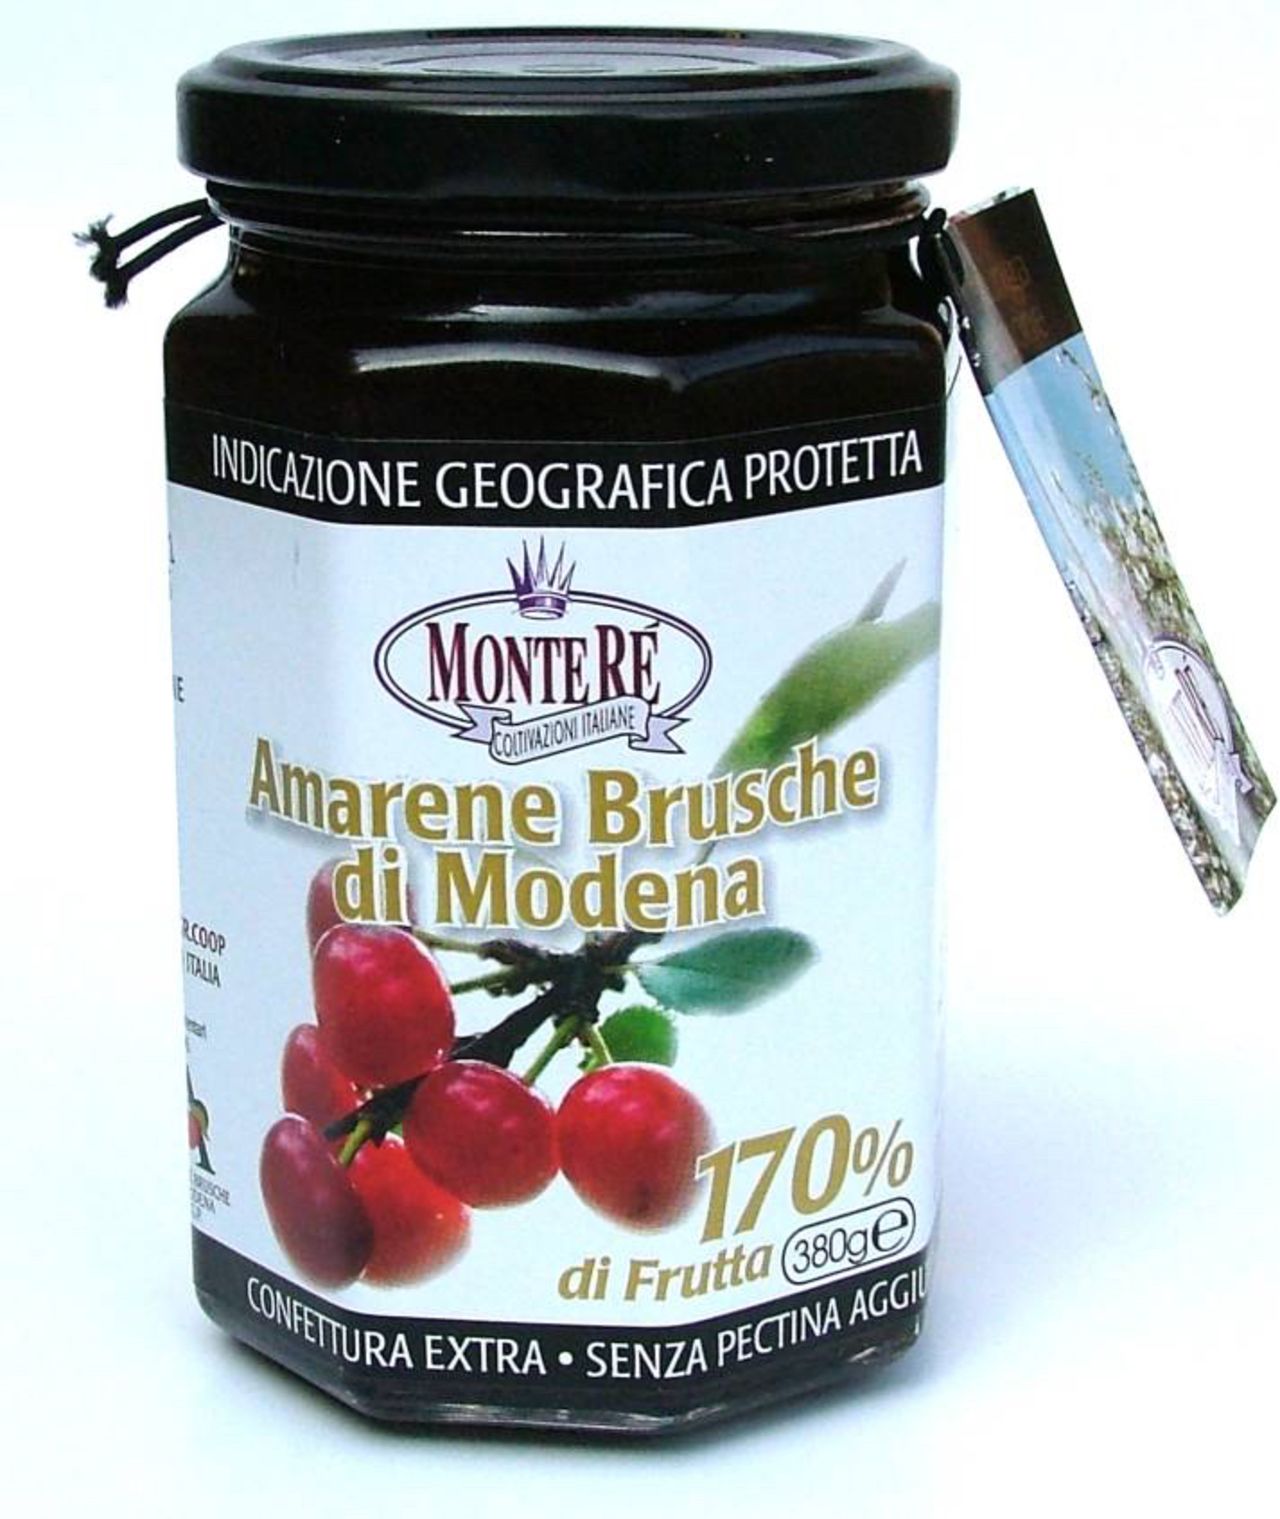 Go ahead. Eat that whole jar of bittersweet black cherry jam. Nobody will judge you -- confettura di amarene brusche is delicious. 